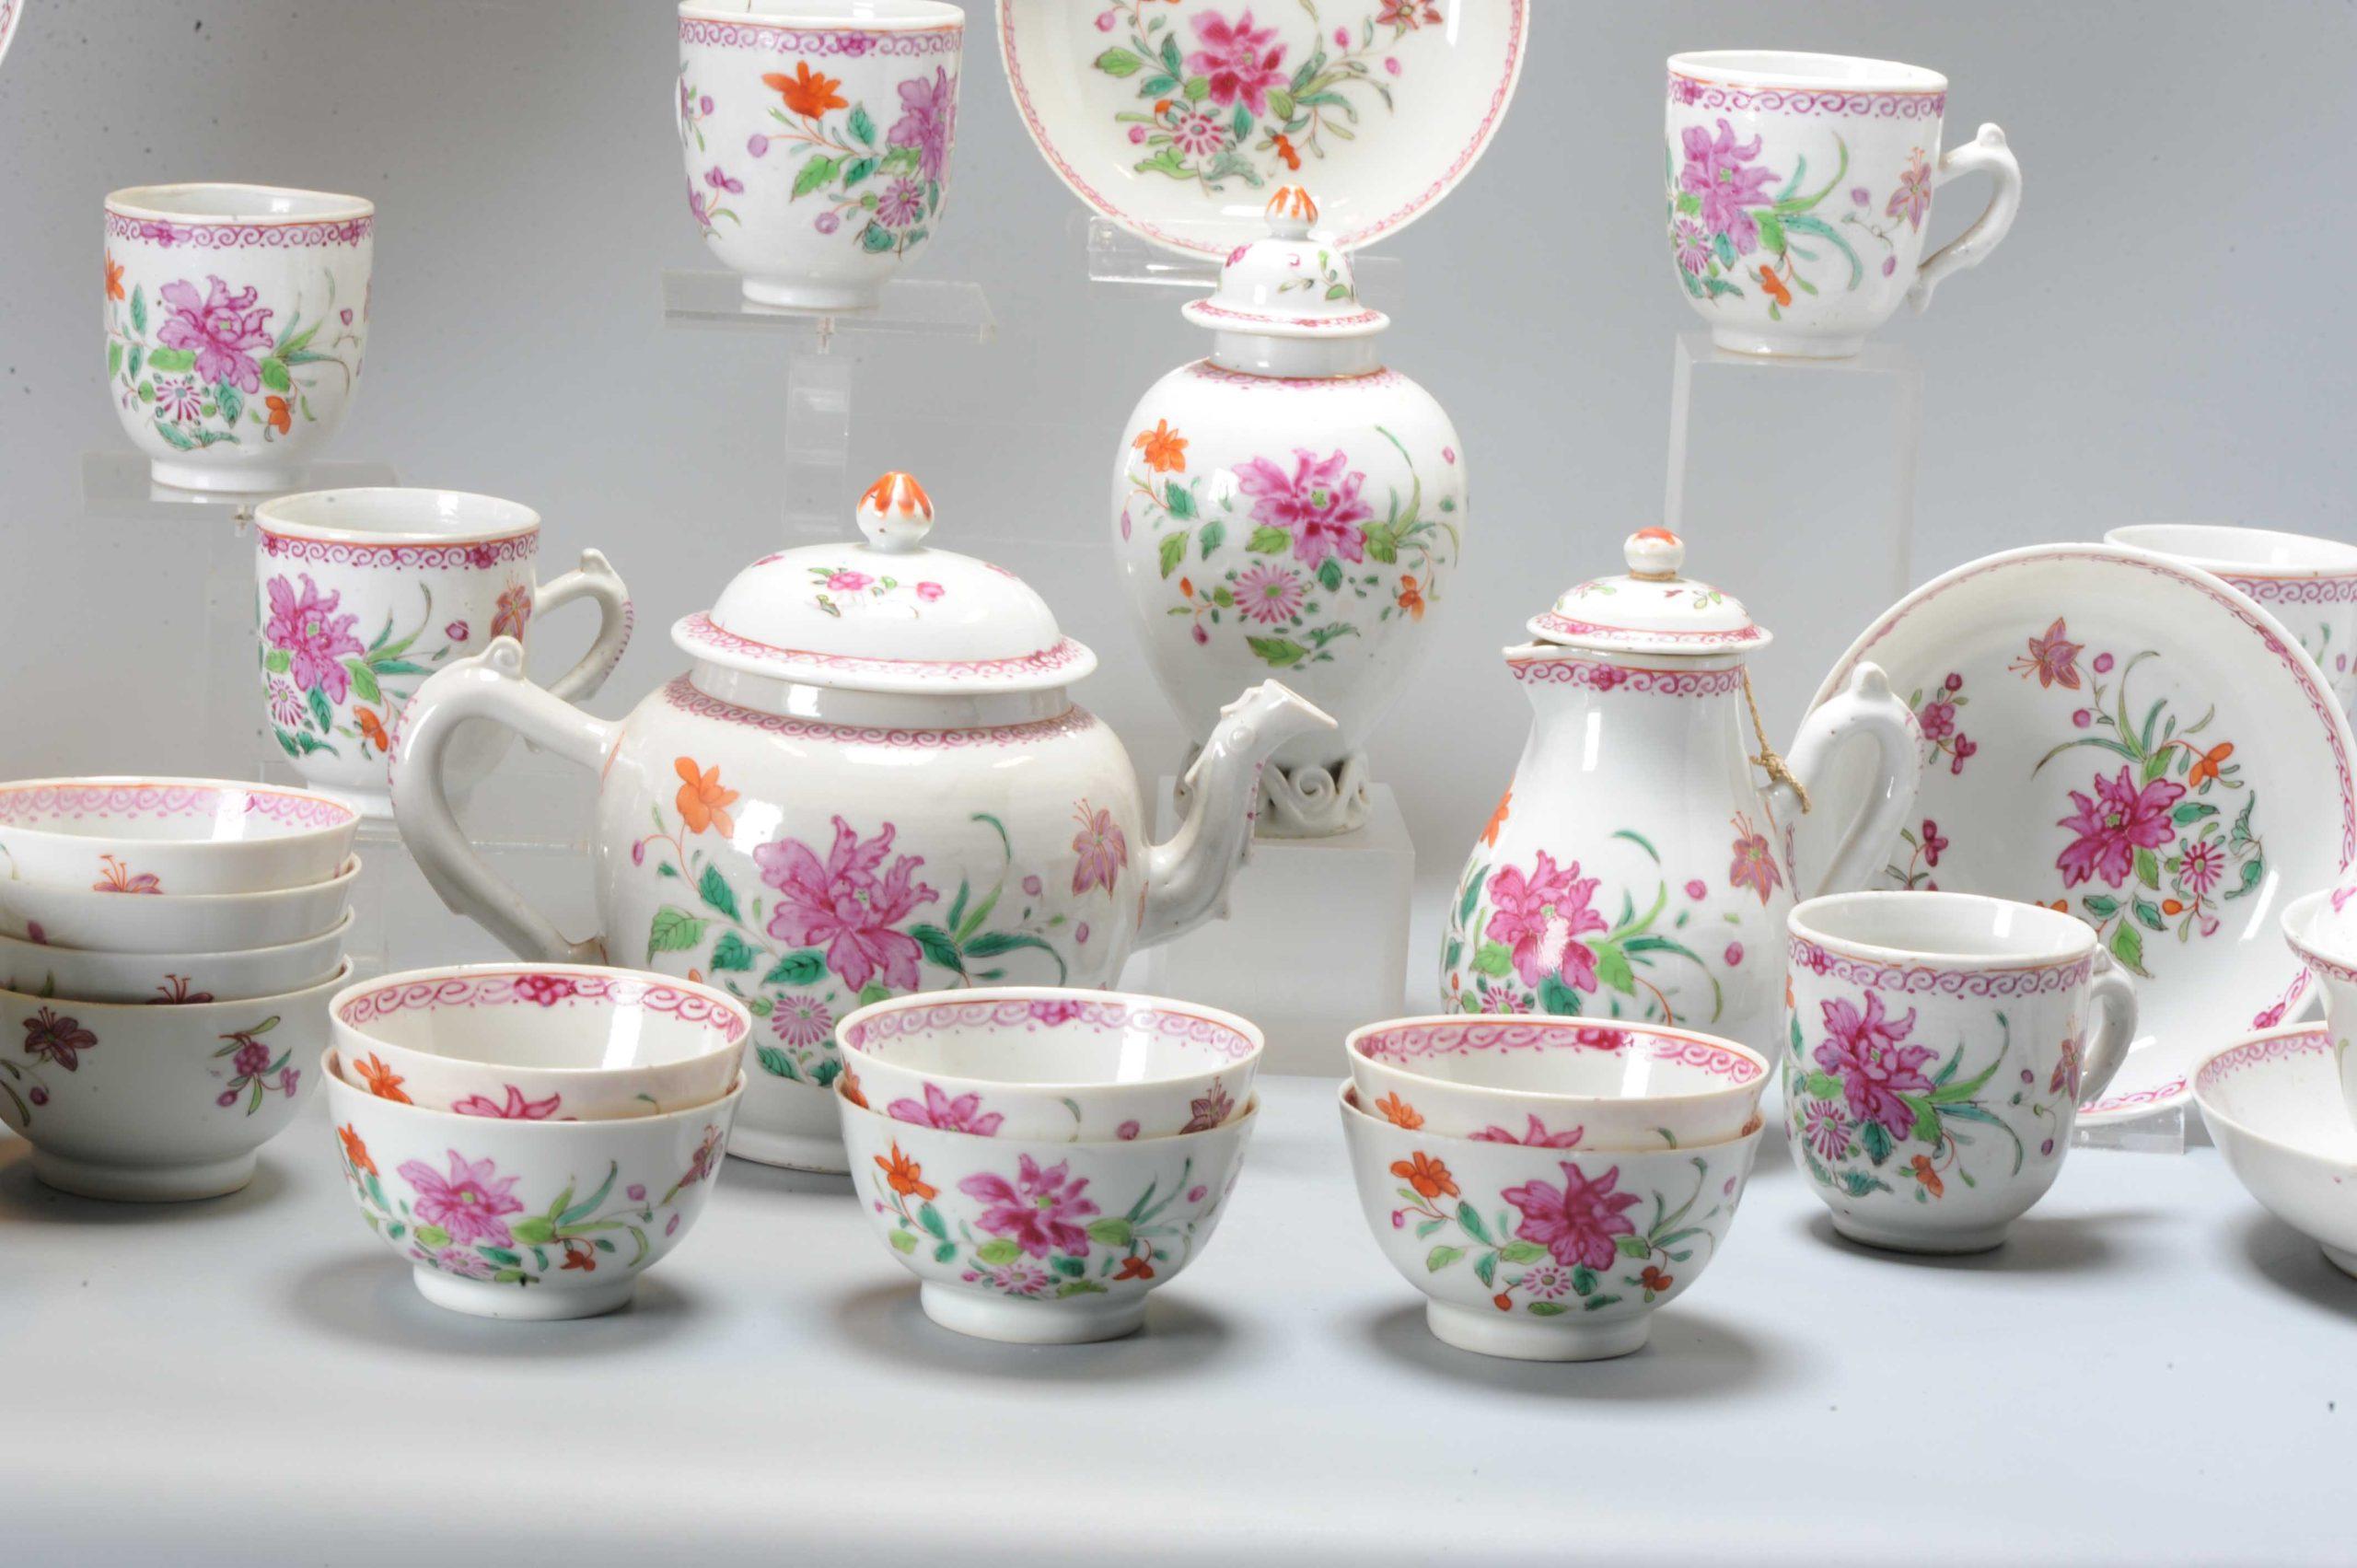 Qianlong, 18th century, Famille Rose. Very fine painting
1 Teapot
1. Creamer
1. Teacaddy
1. Lidded Bowl with underplate for sweets
1. Washing Bowl with underplate
10 Teabowls
6 Tea Cups
10 Saucers

Additional information:
Material: Porcelain &